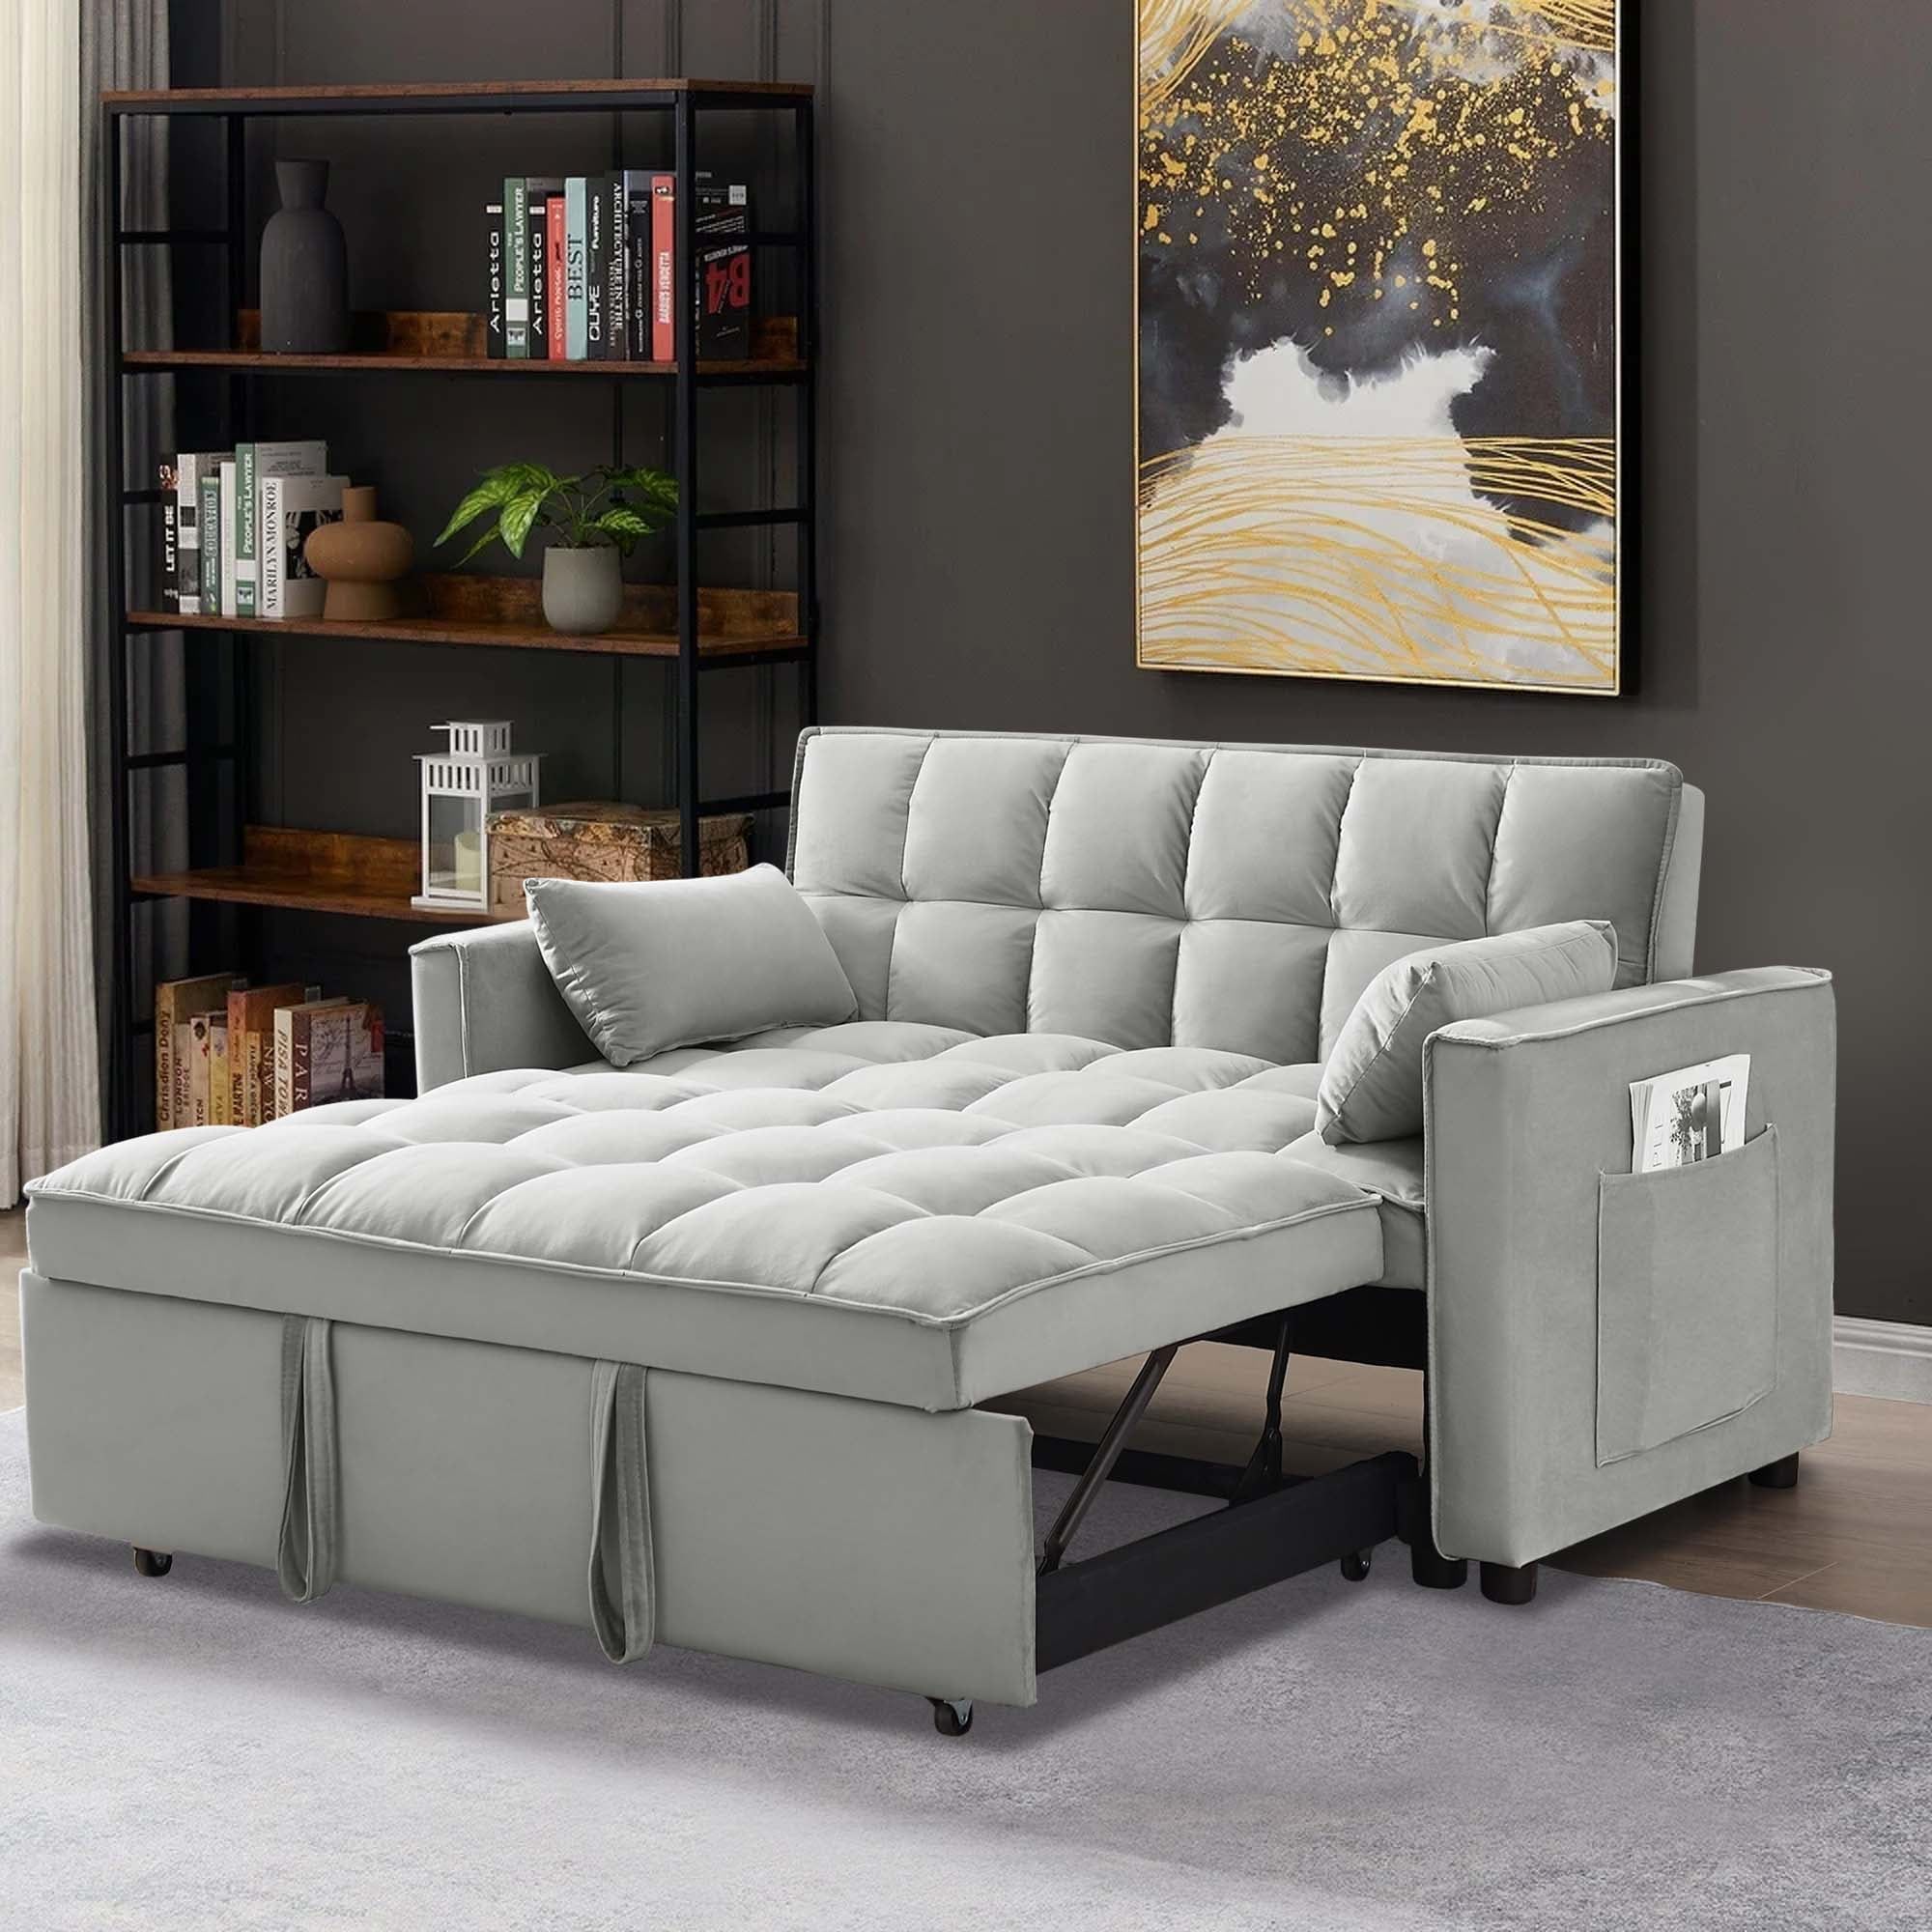 Aukfa Upholstered Sleeper Sofa Pull Out Bed, Convertible Loveseat Sofa Couch  For Living Room – Gray – Walmart For 3 In 1 Gray Pull Out Sleeper Sofas (View 6 of 15)